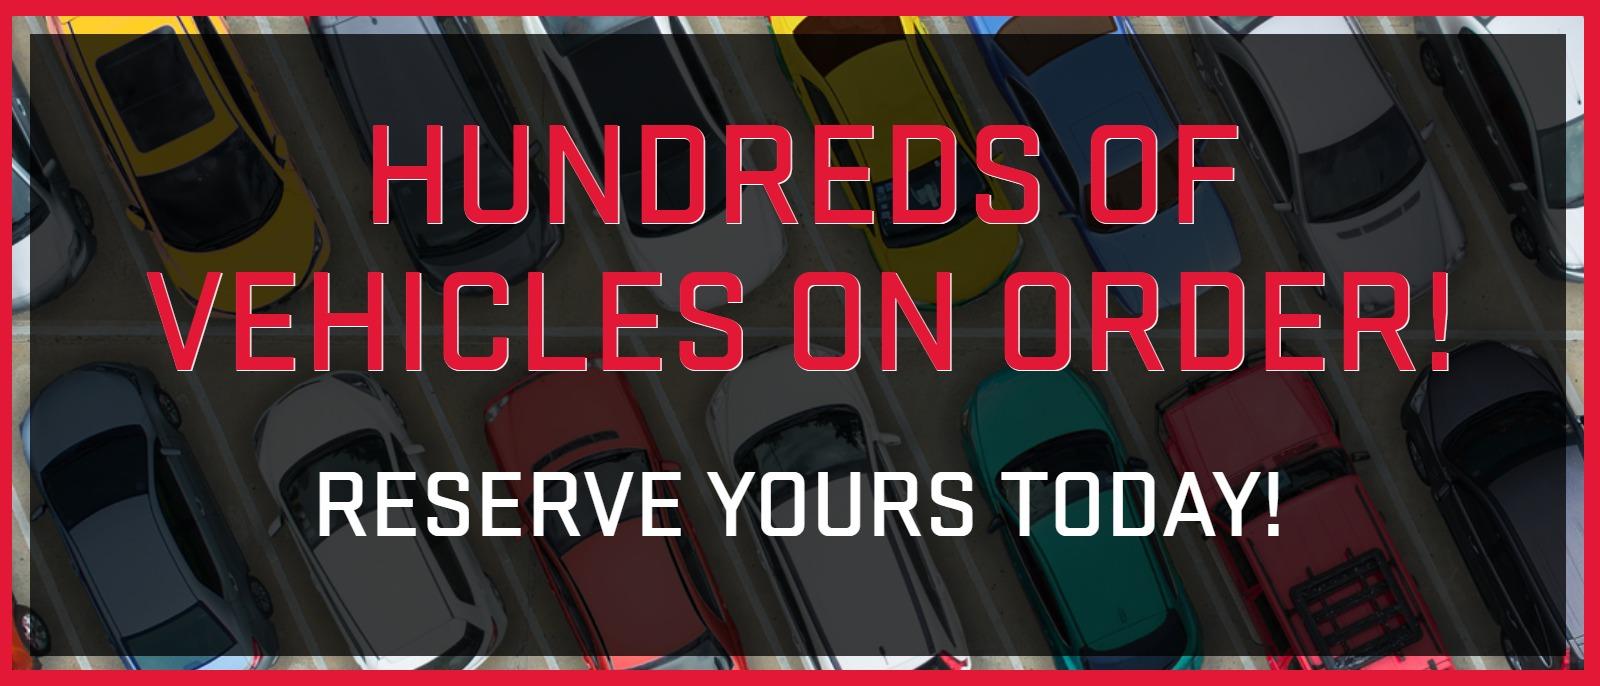 HUNDREDS OF VEHICLES ON ORDER!RESERVE YOURS TODAY!